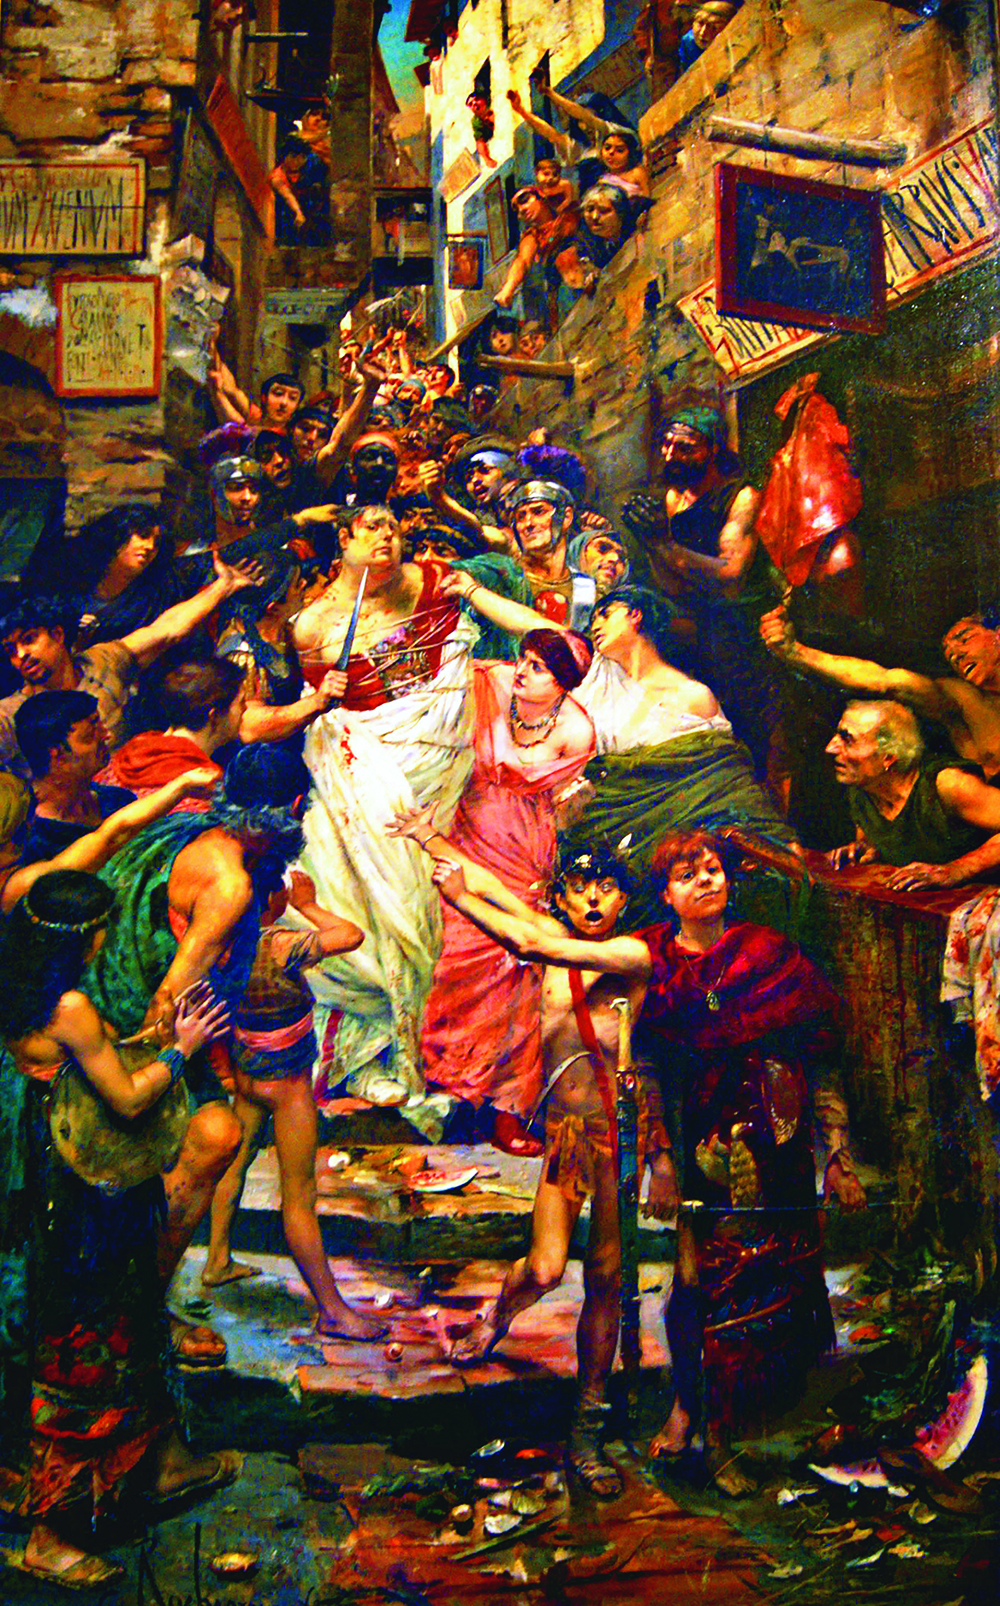 Vitellius led through the streets of Rome by the people, by Georges Rochegrosse, 1883